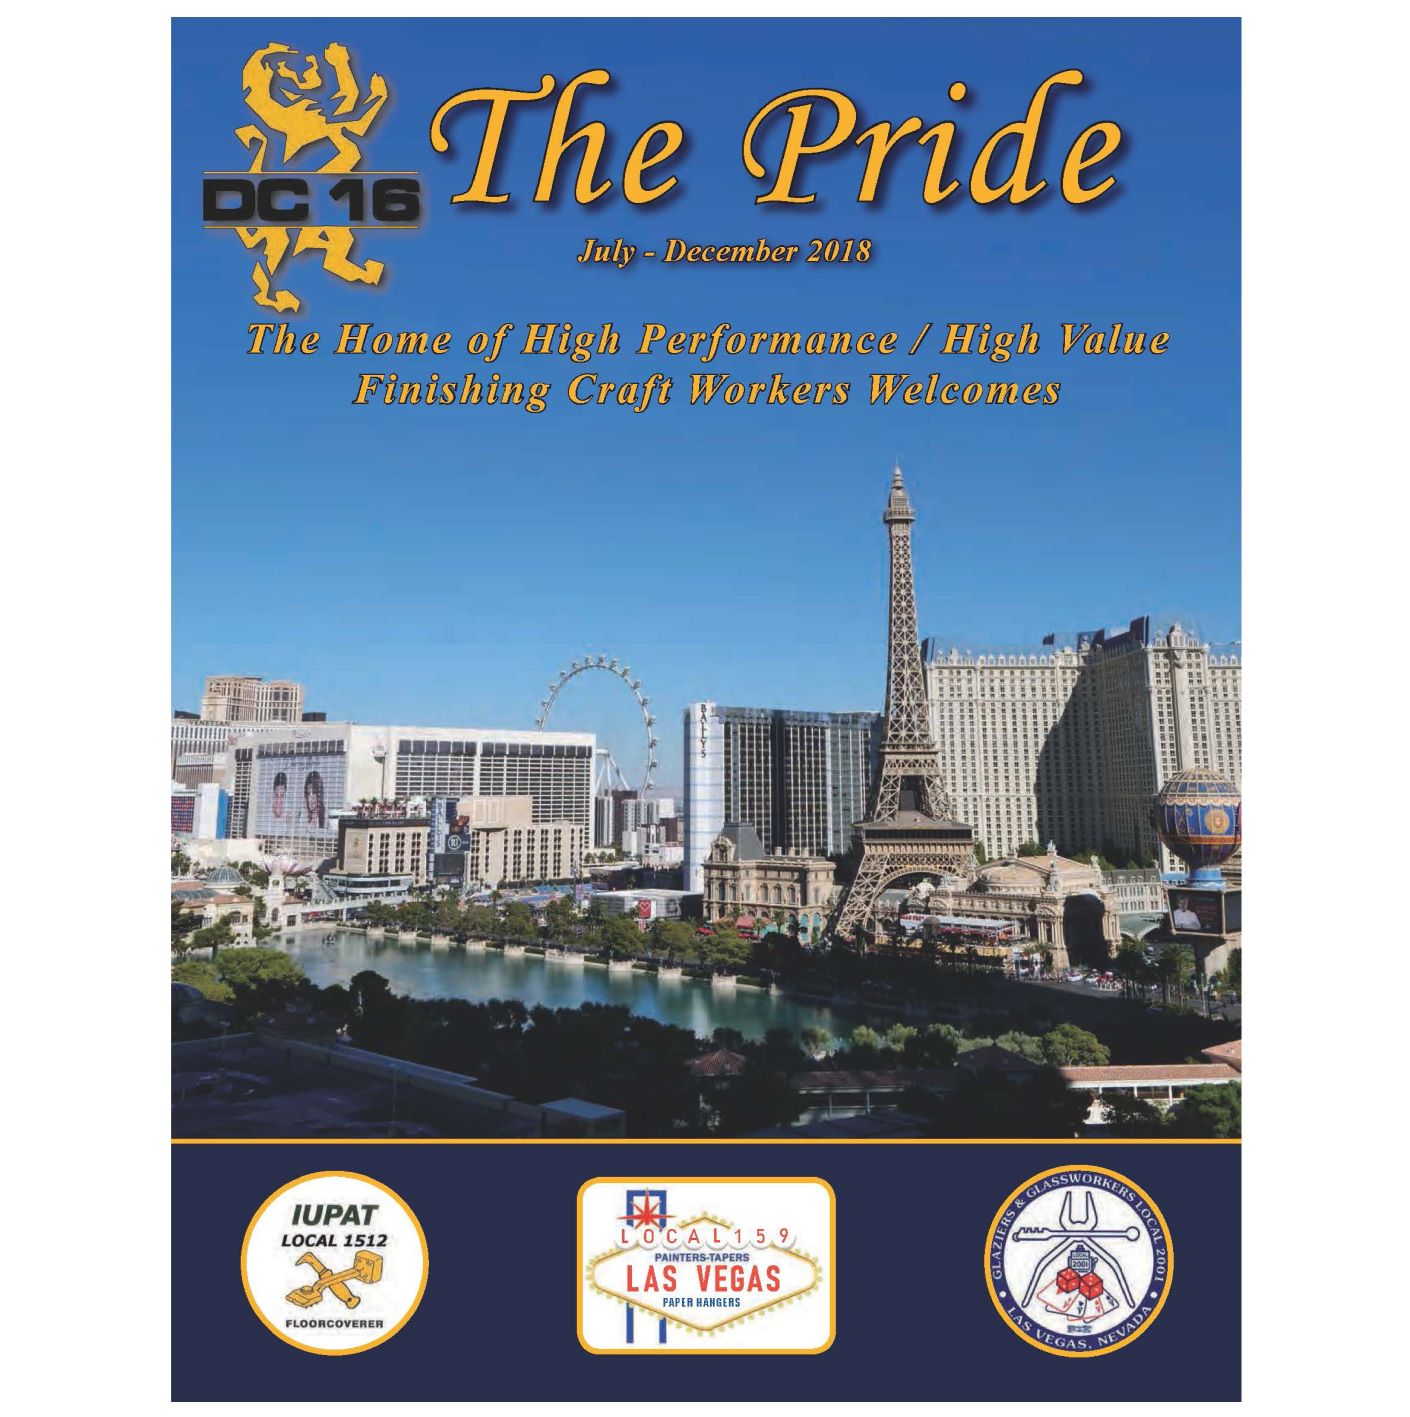 Image from the Gallery: THE PRIDE JULY – DECEMBER 2018